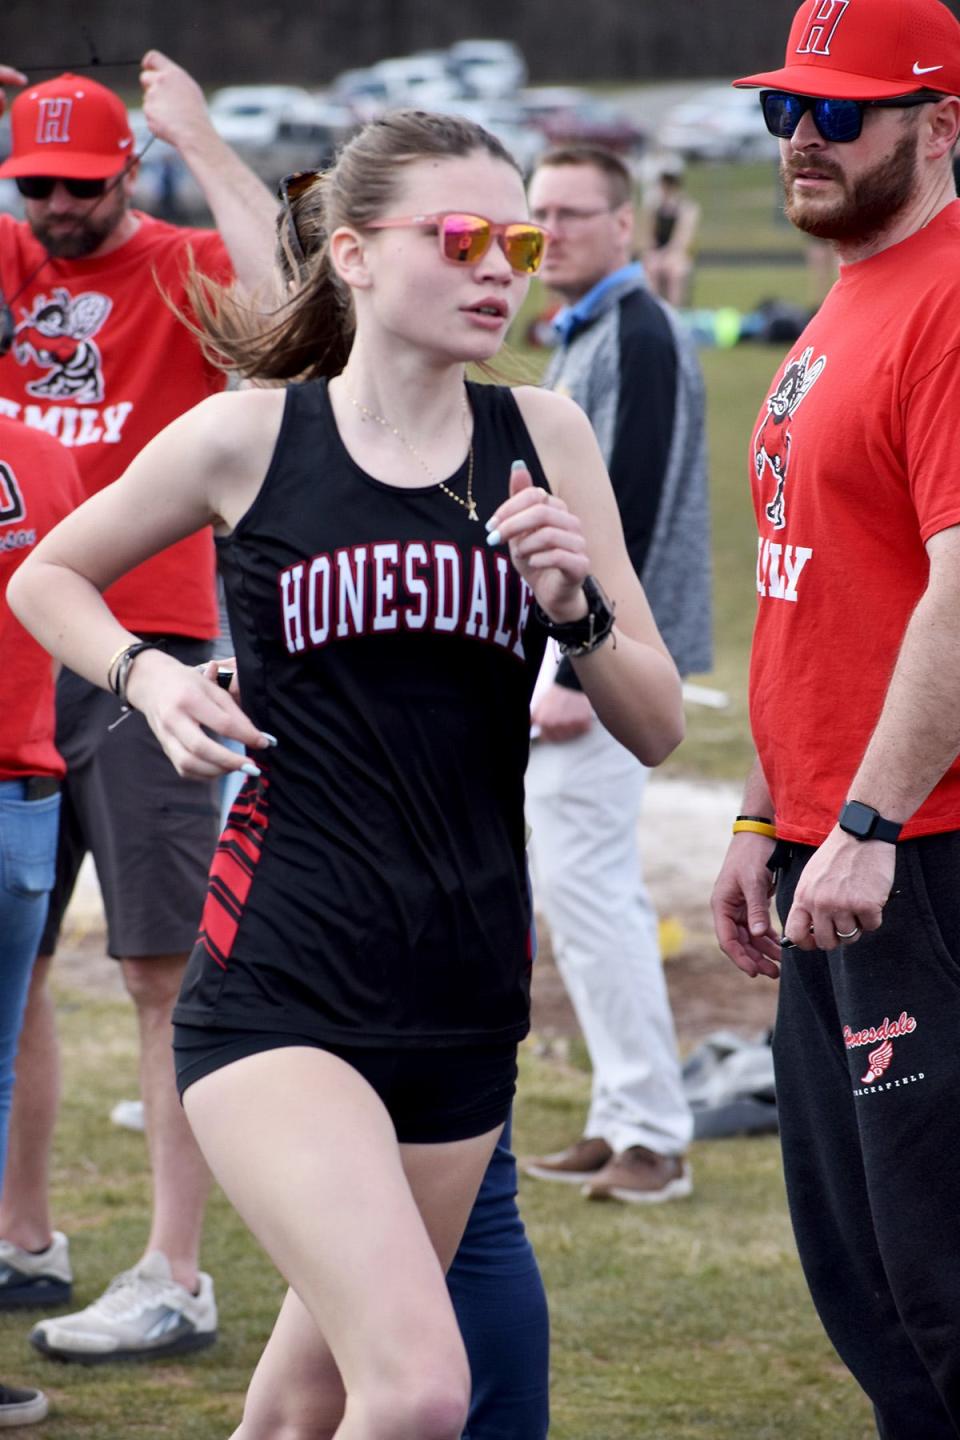 Brenna Dahlgren of Honesdale brings home the gold against Western Wayne in the 3200M with a time of 12:11.